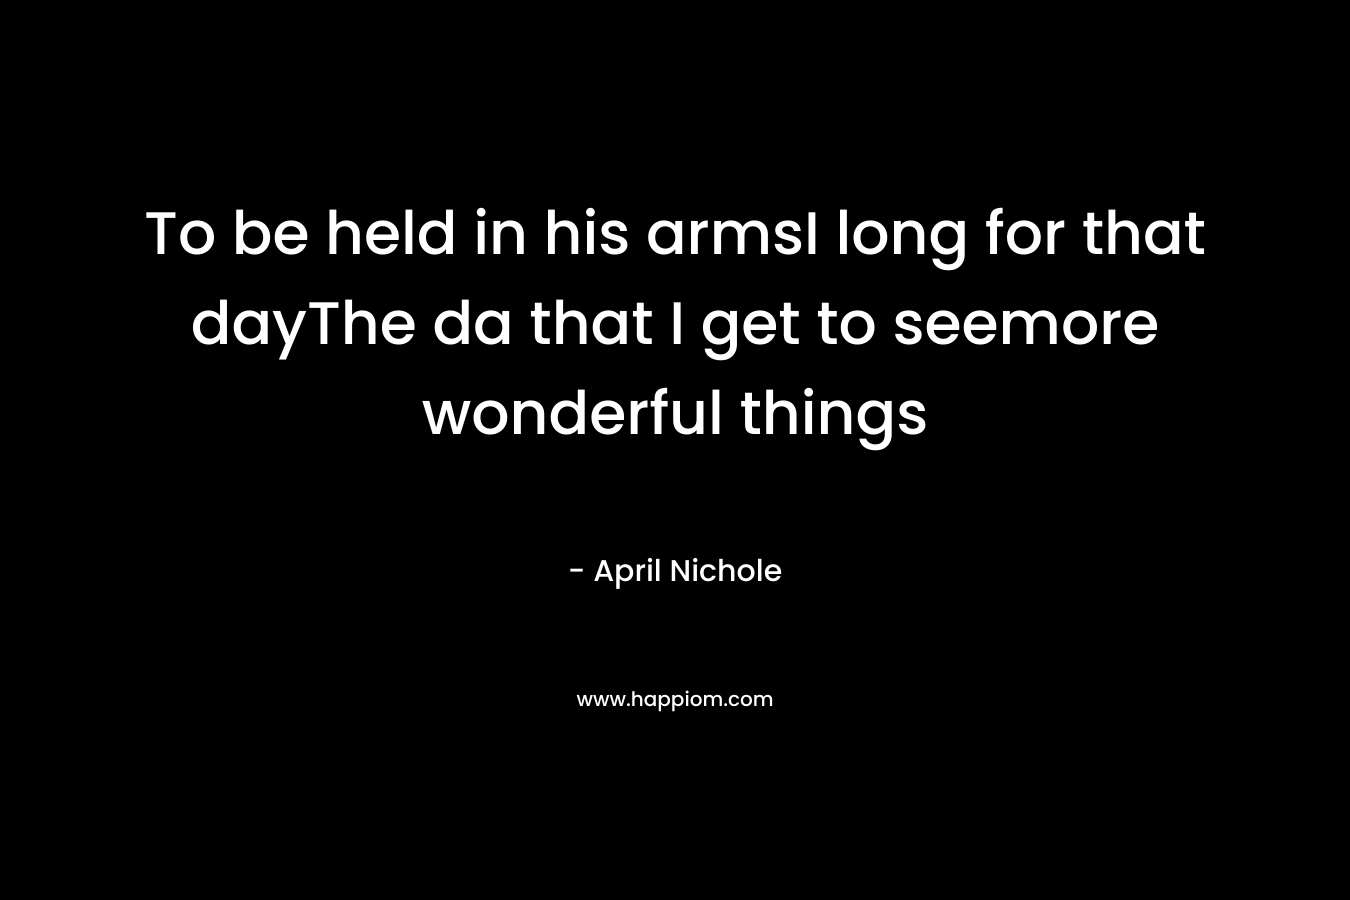 To be held in his armsI long for that dayThe da that I get to seemore wonderful things – April Nichole